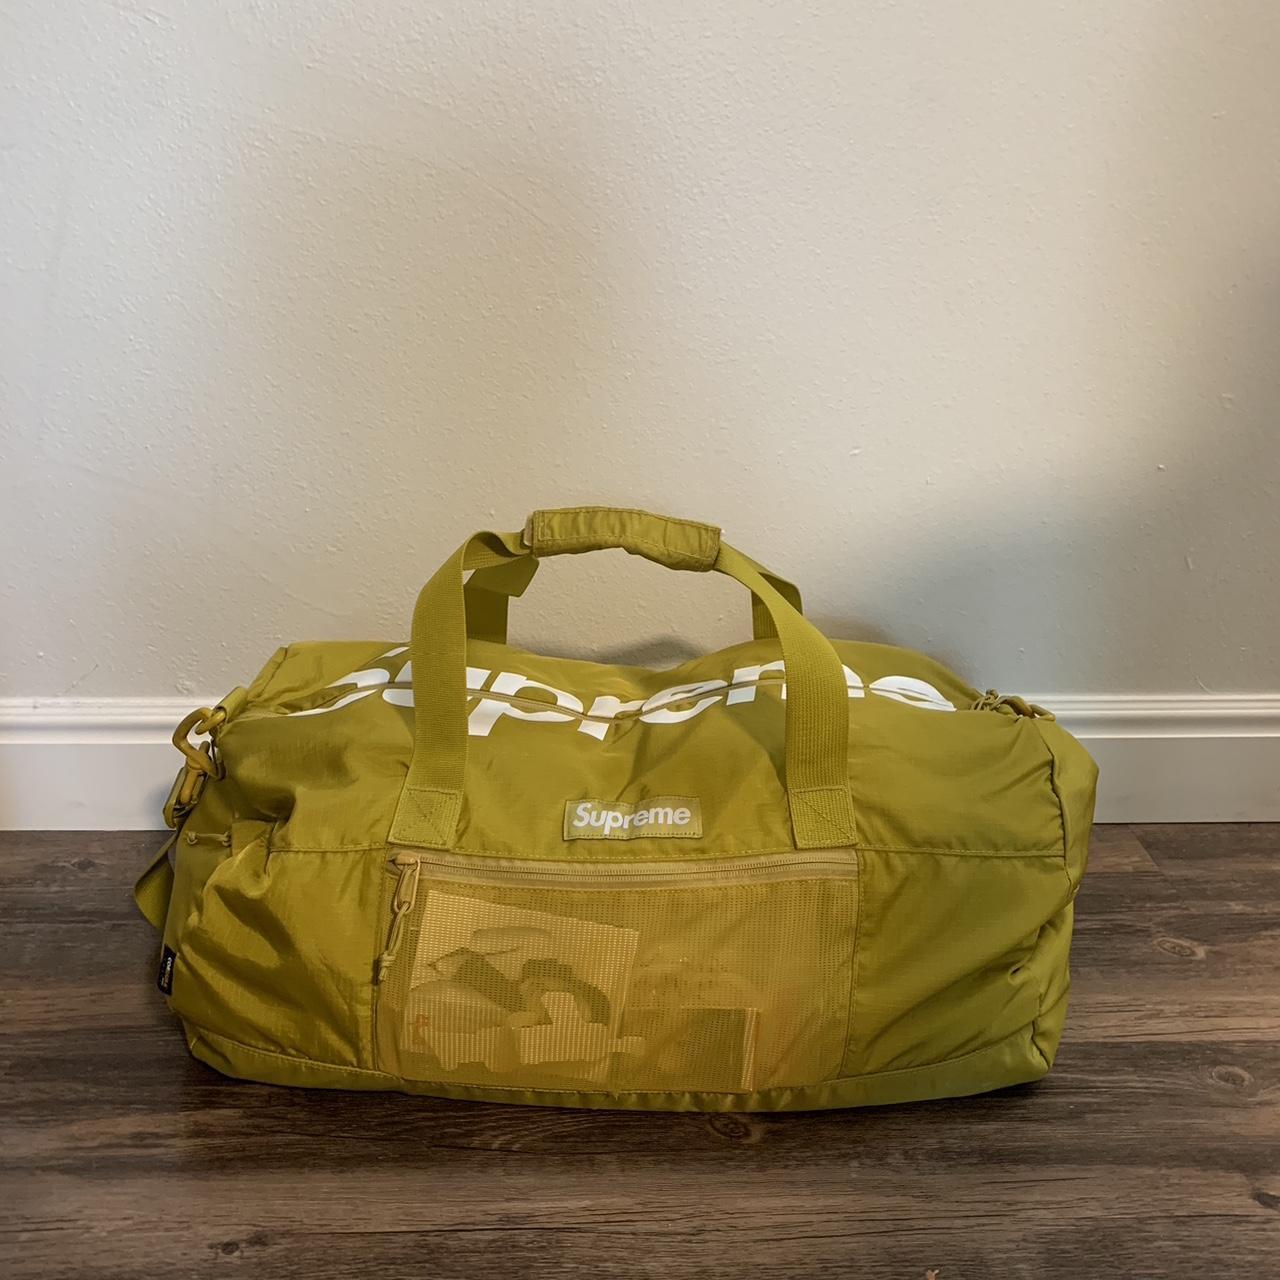 Supreme ss17 yellow duffel bag. Very rare only other